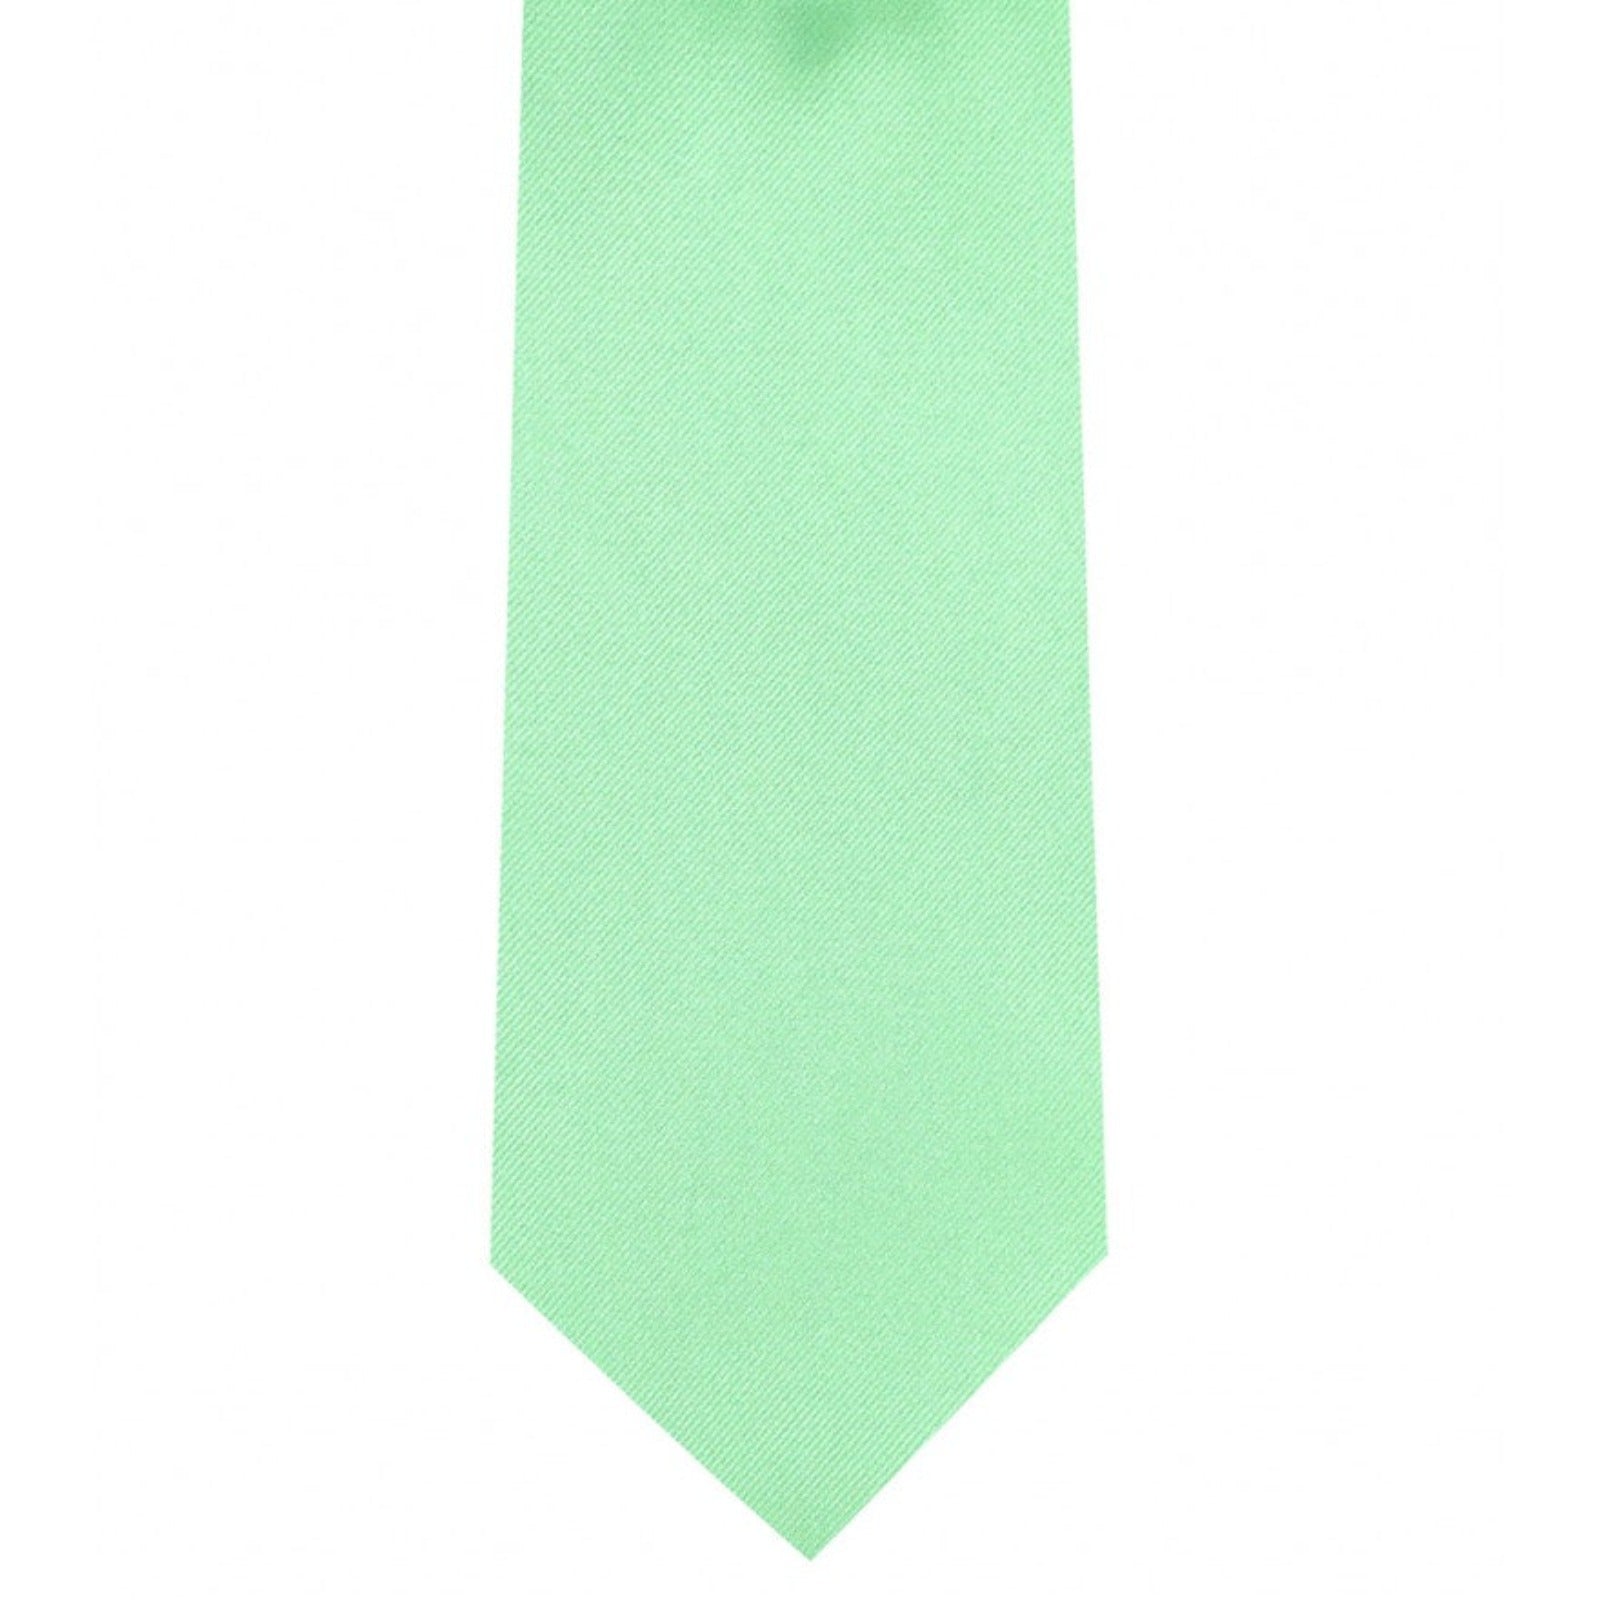 Classic Pastel Green Tie Ultra Skinny tie width 2.25 inches With Matching Pocket Square | KCT Menswear